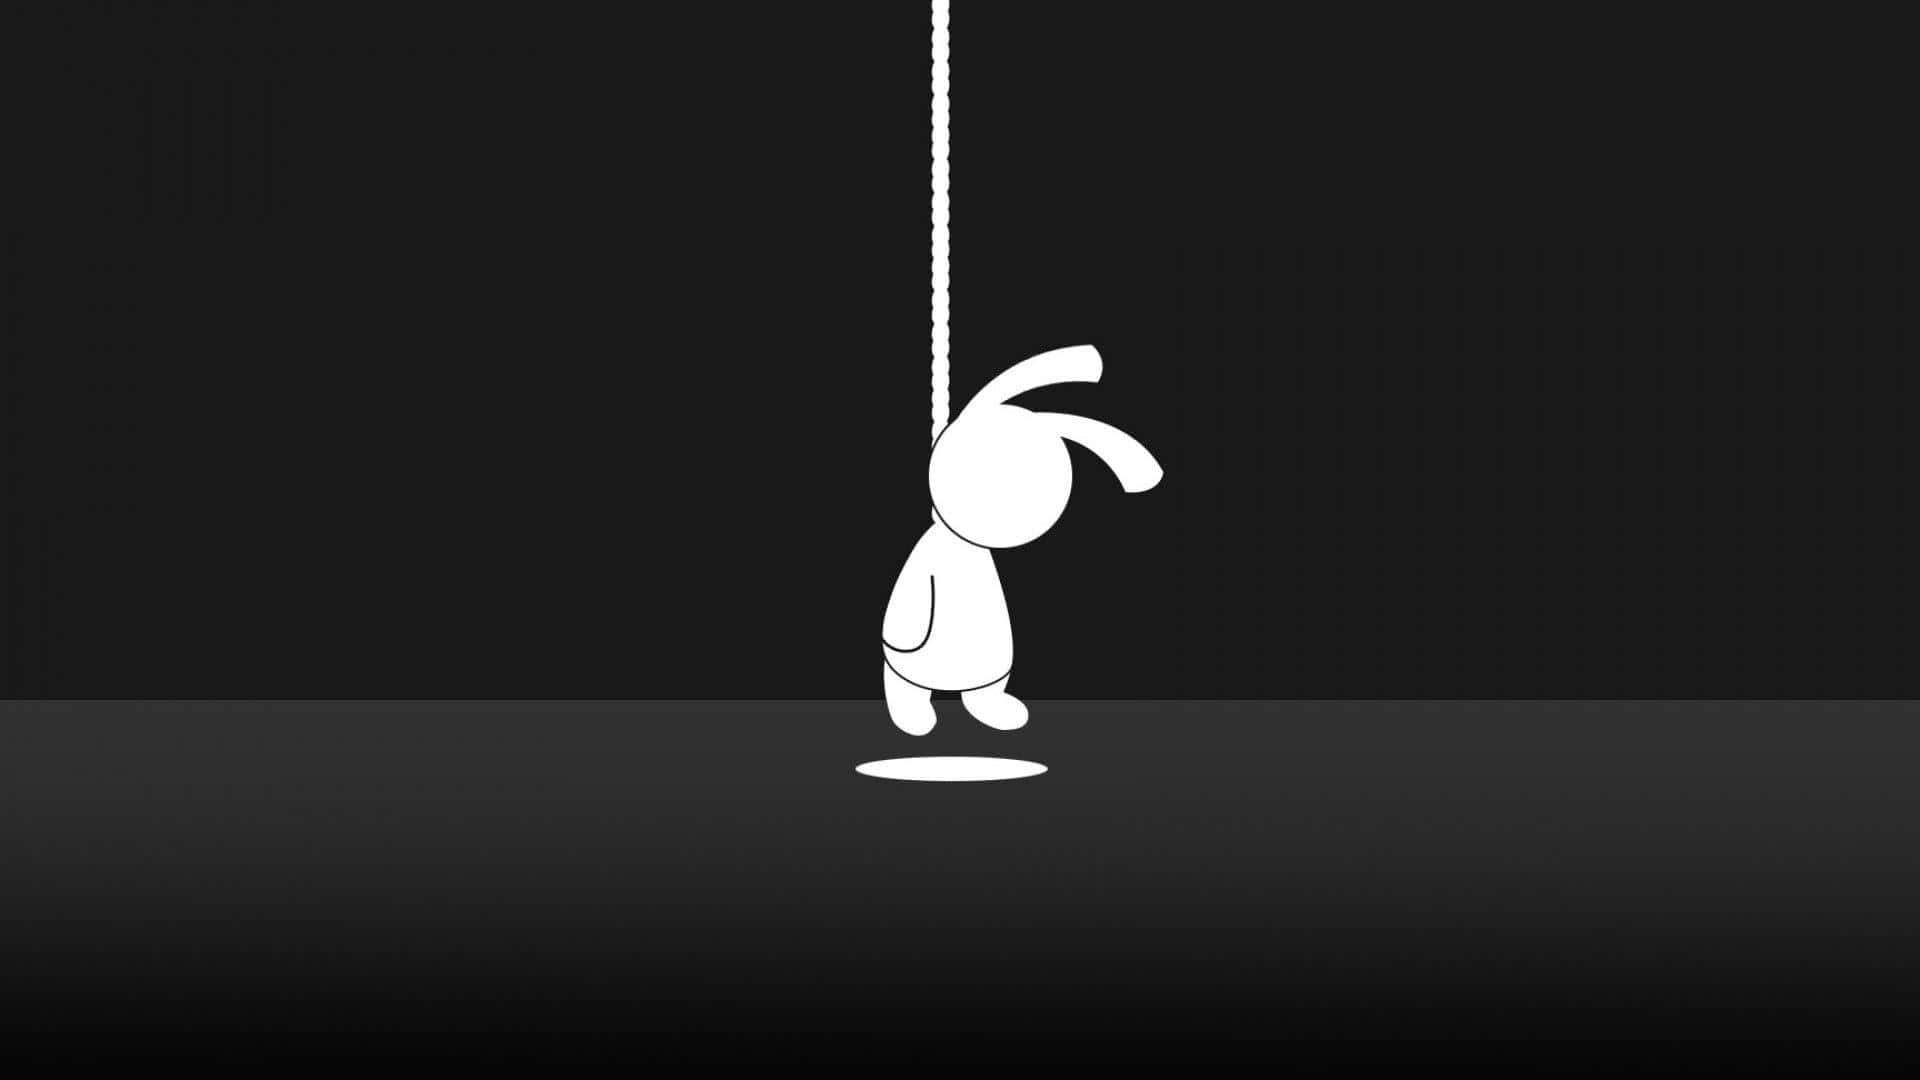 A Black And White Image Of A Rabbit Hanging From A Rope